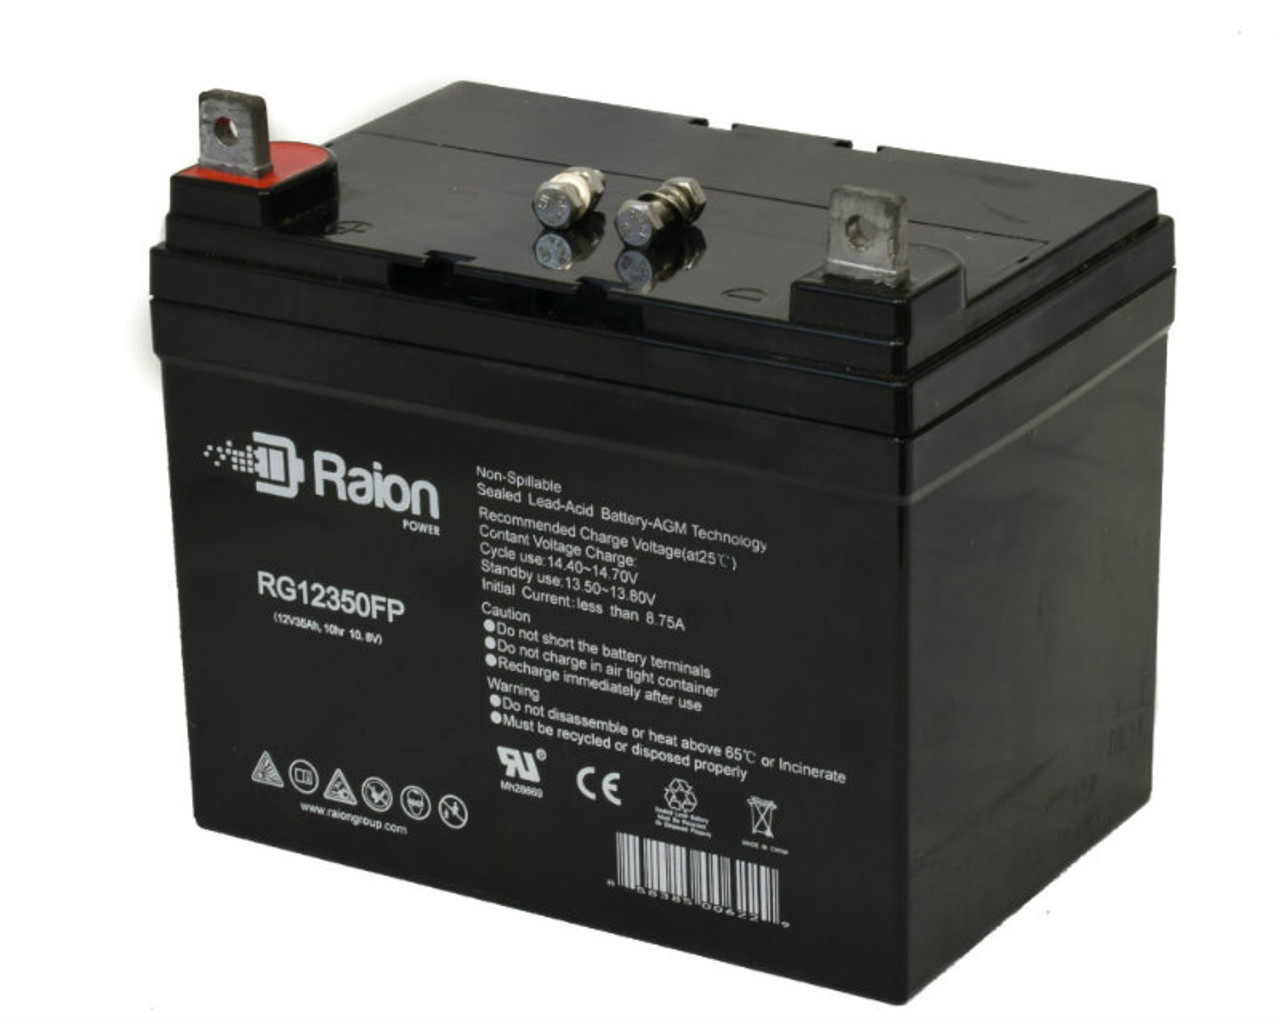 Raion Power Replacement 12V 35Ah RG12350FP Battery for Agco Allis ZT16H